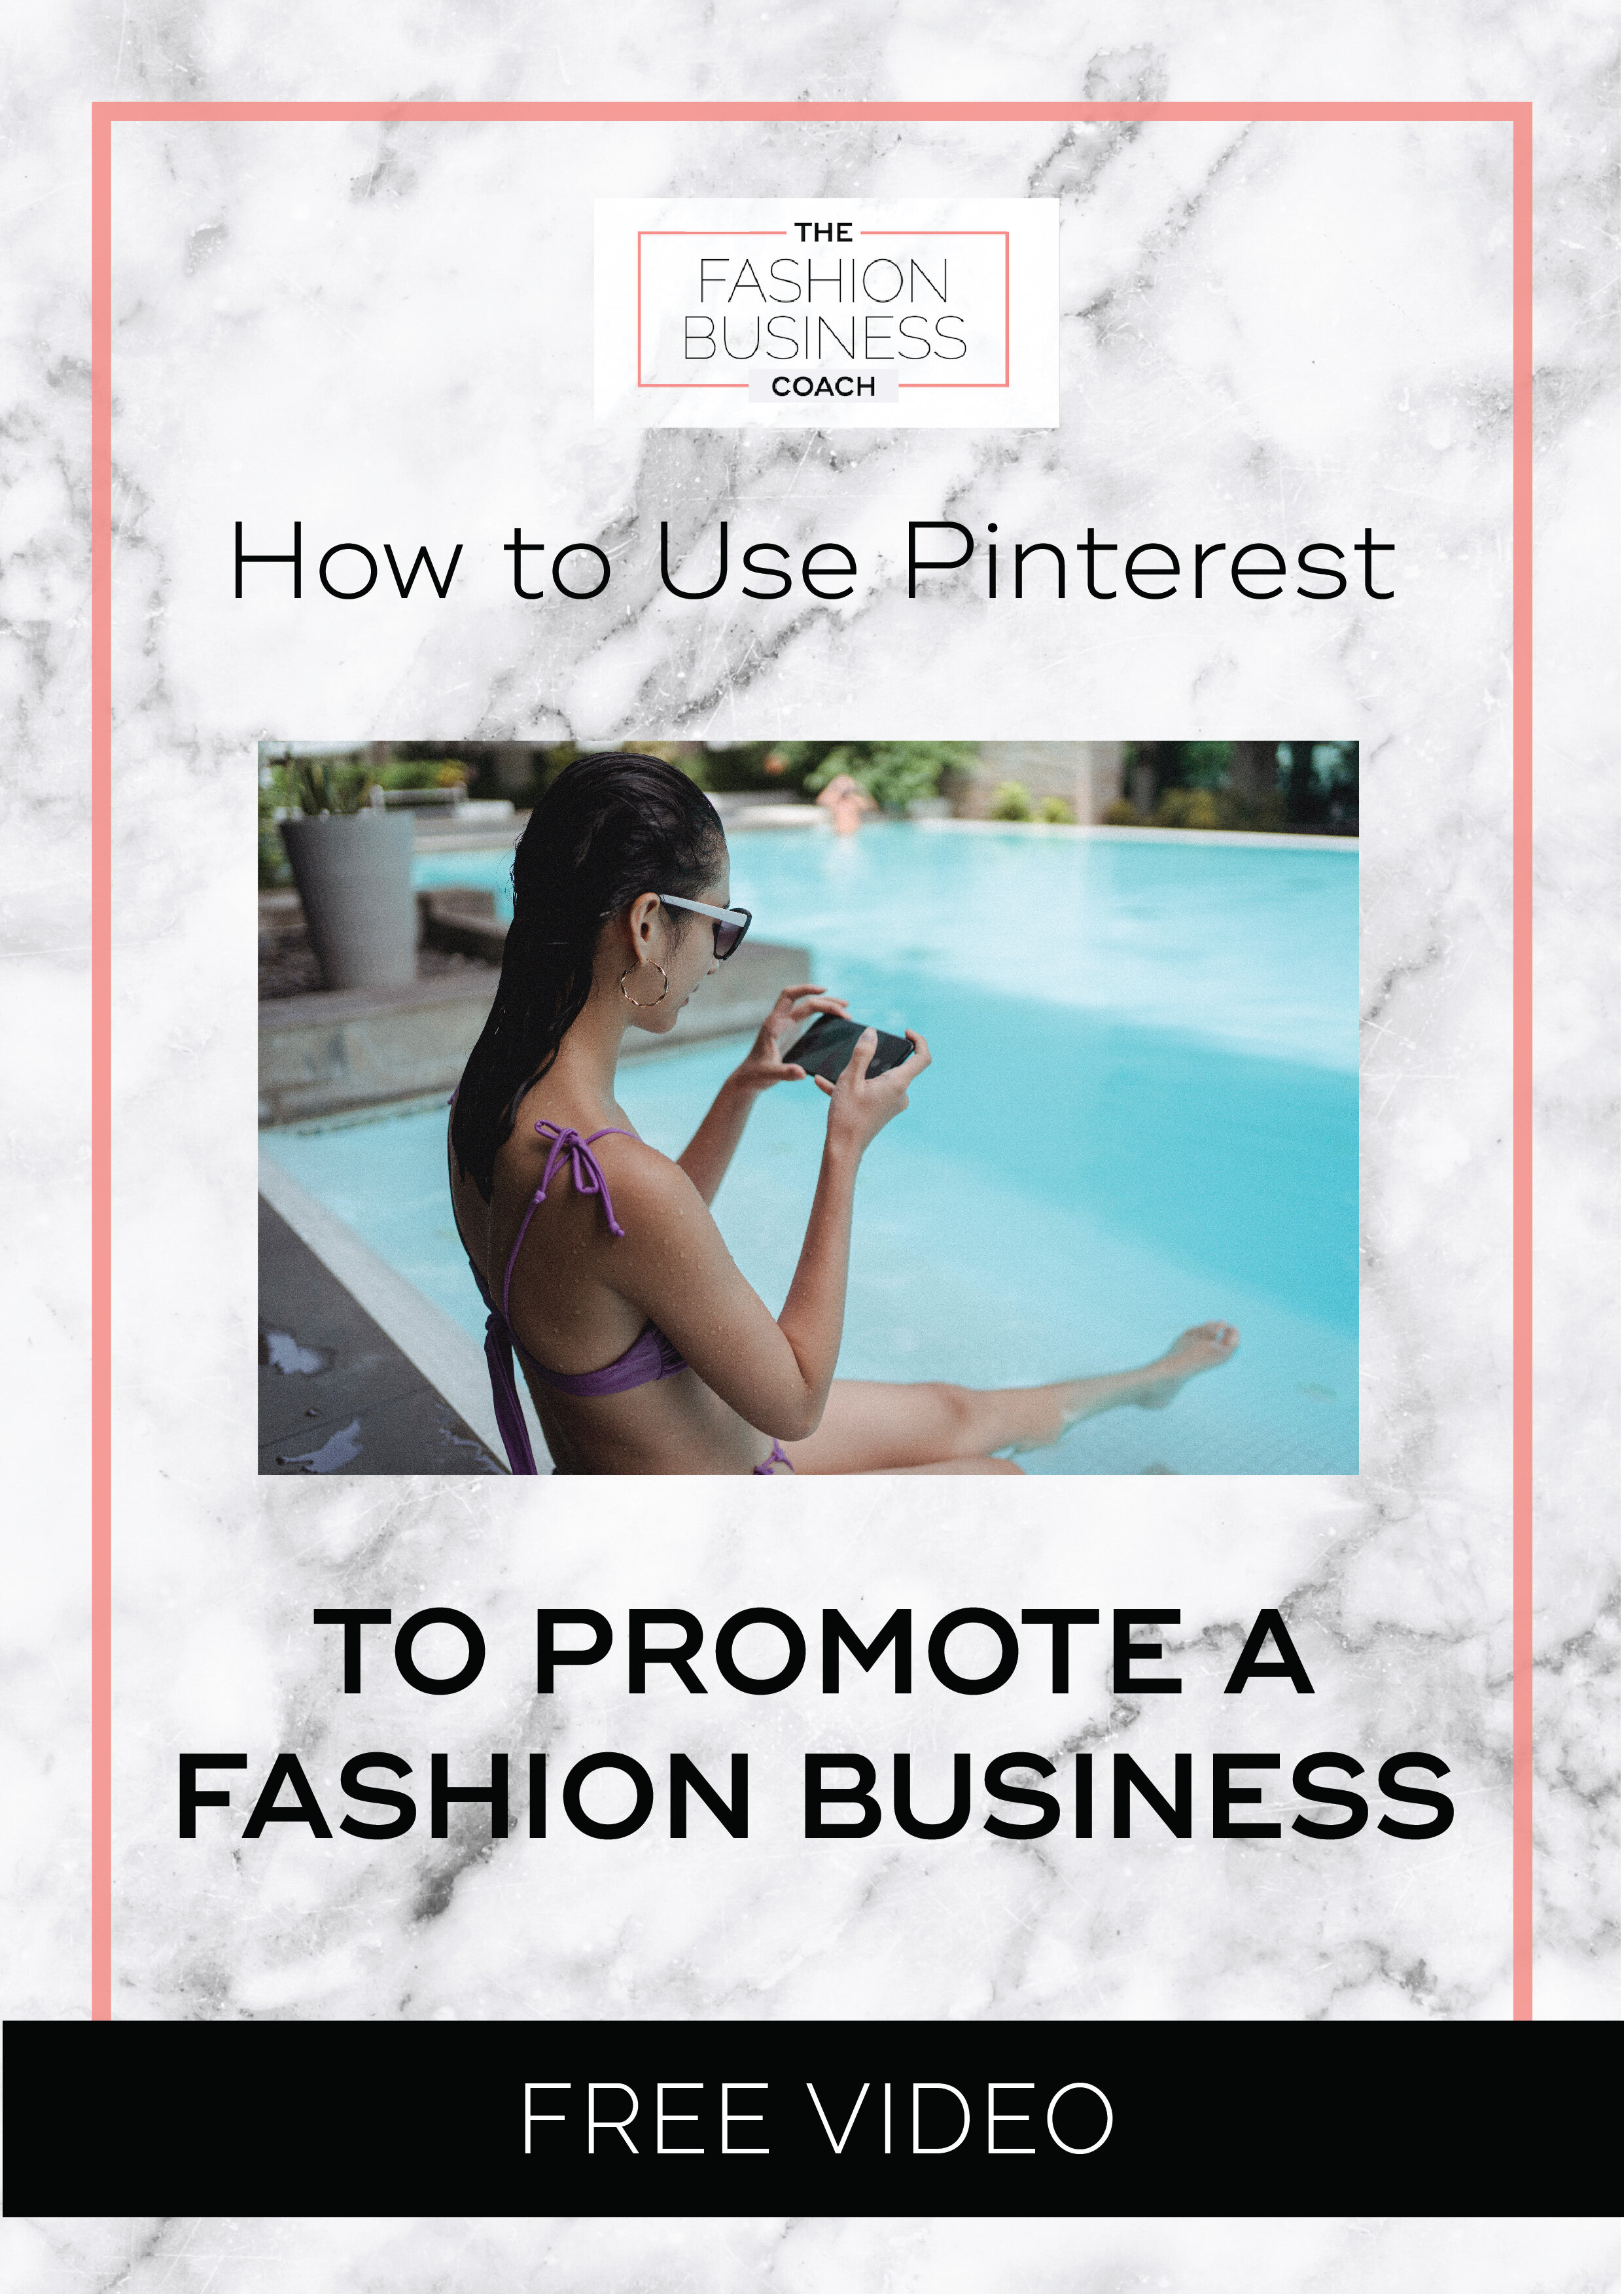 How to use Pinterest to Promote a Fashion Business2.jpg